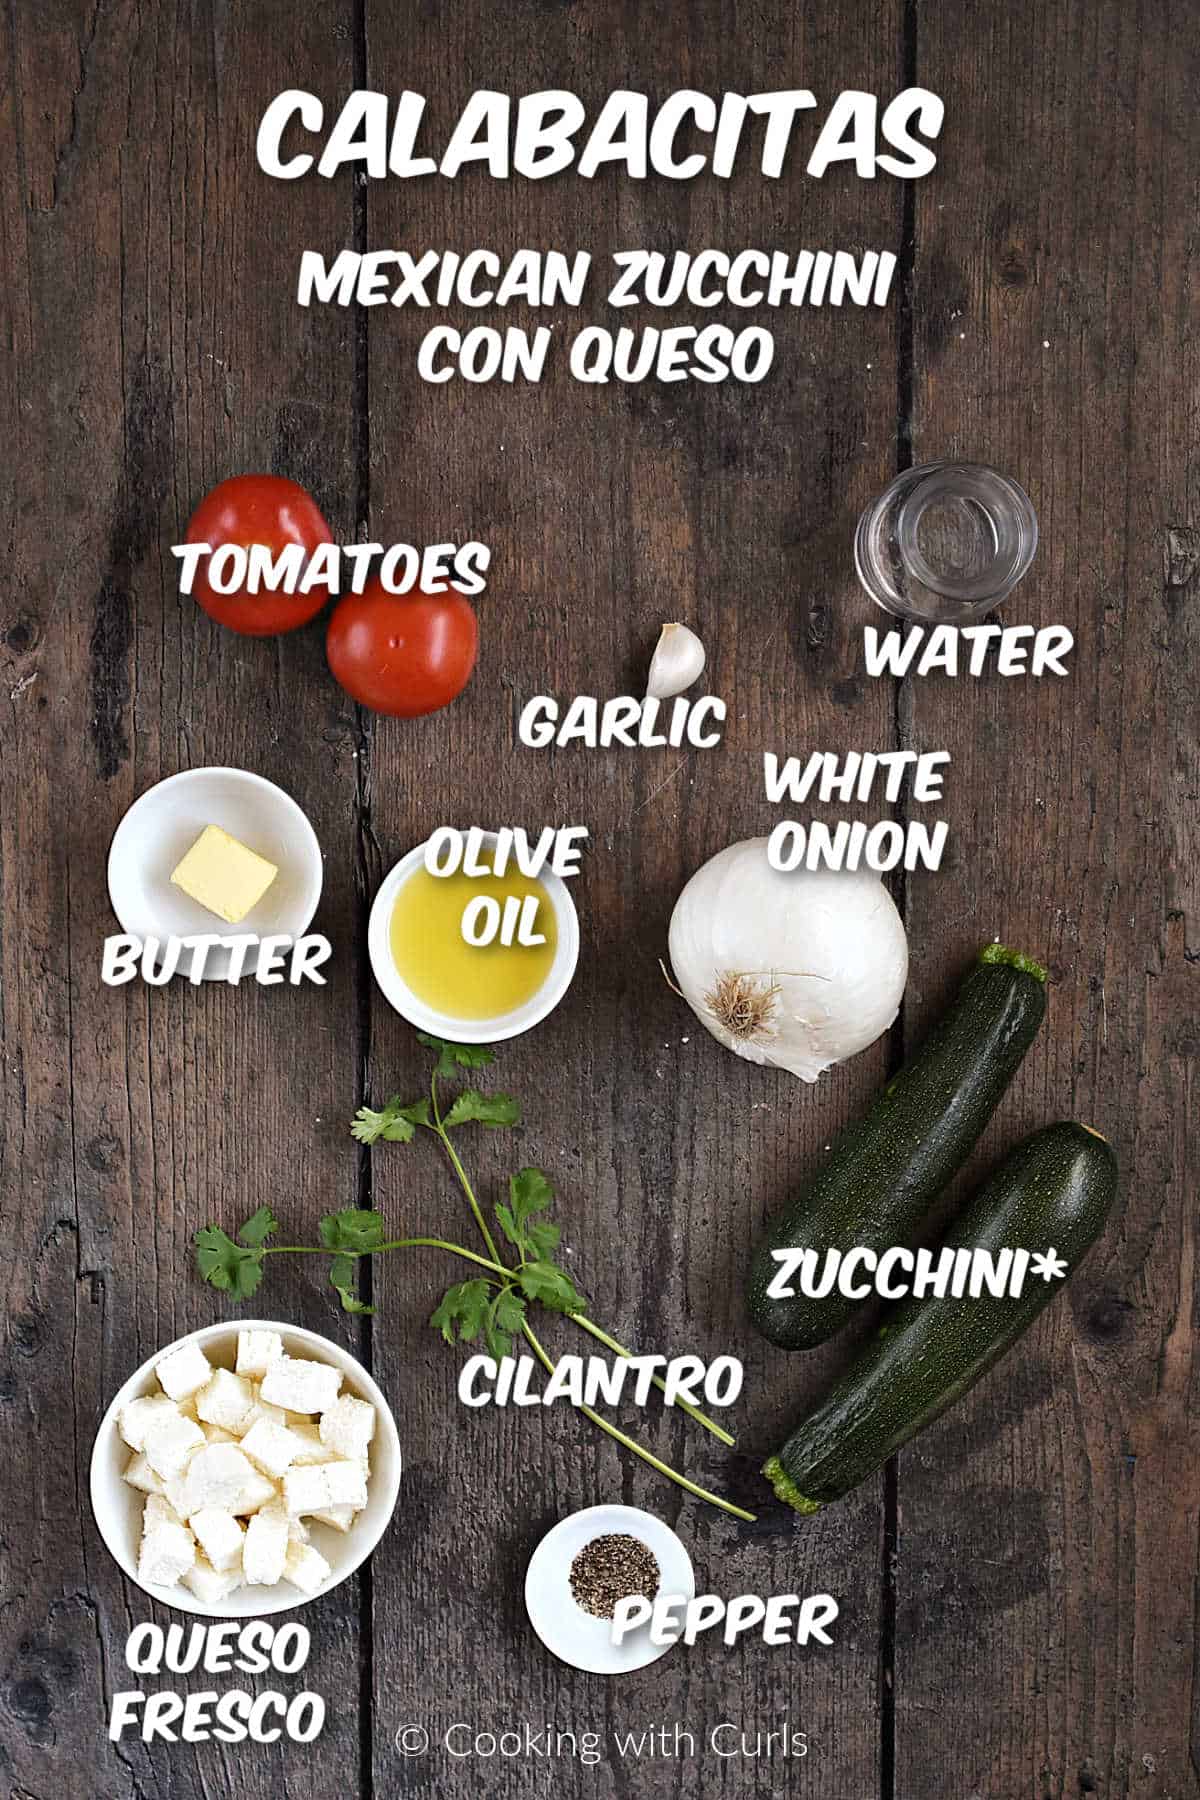 Ingredients to make calabacitas Mexican zucchini con queso.